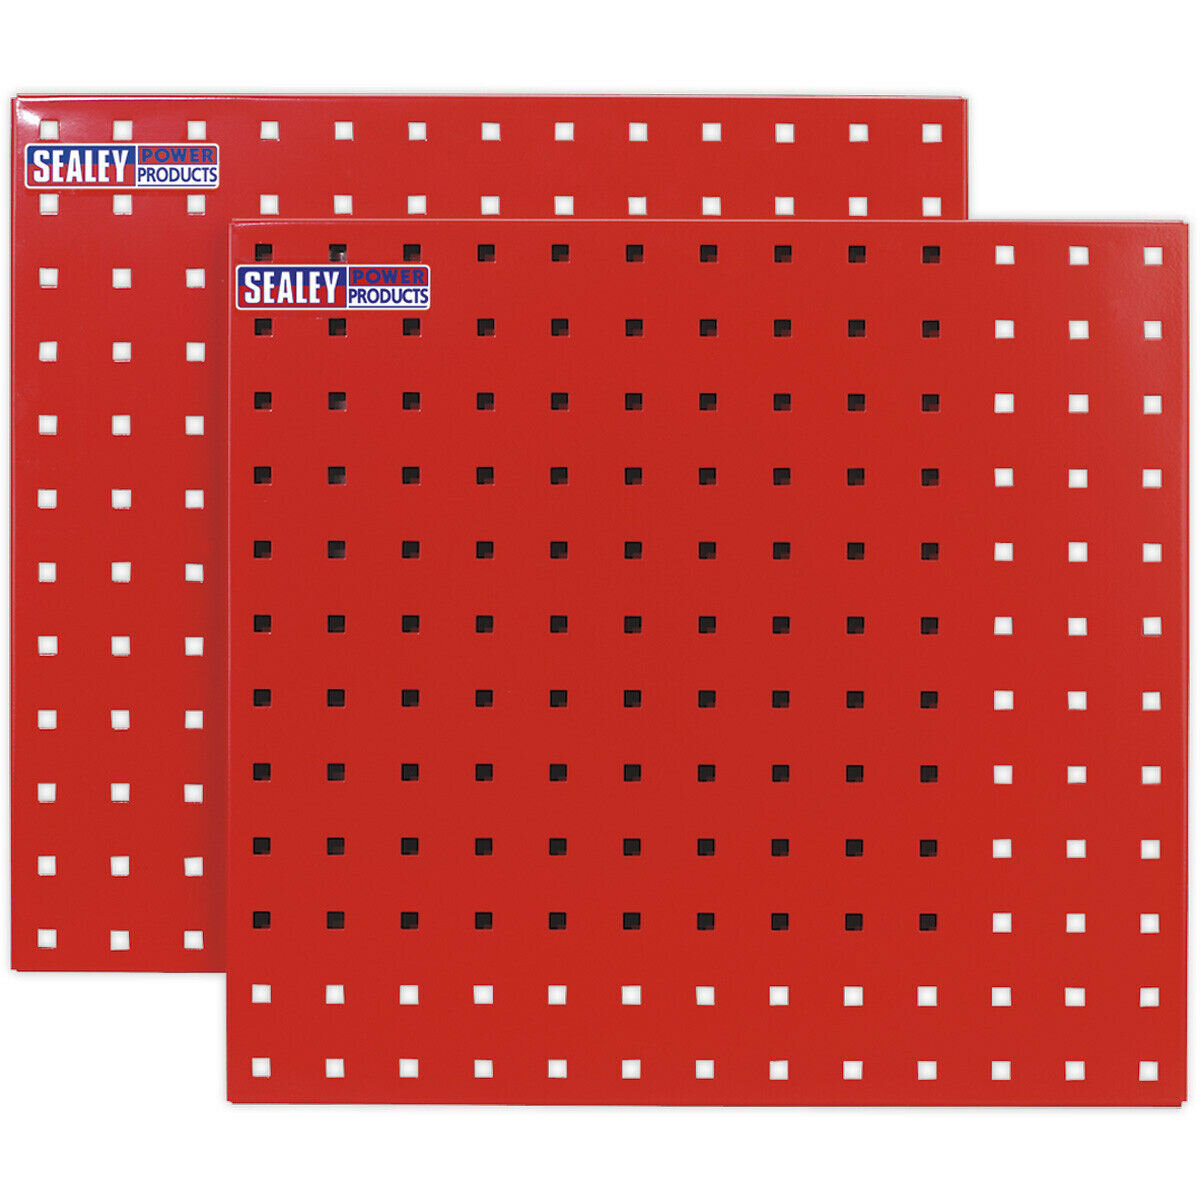 2 PACK - 500 x 500mm Red Wall Mounted Tool Storage Hook Panel - Warehouse Tray